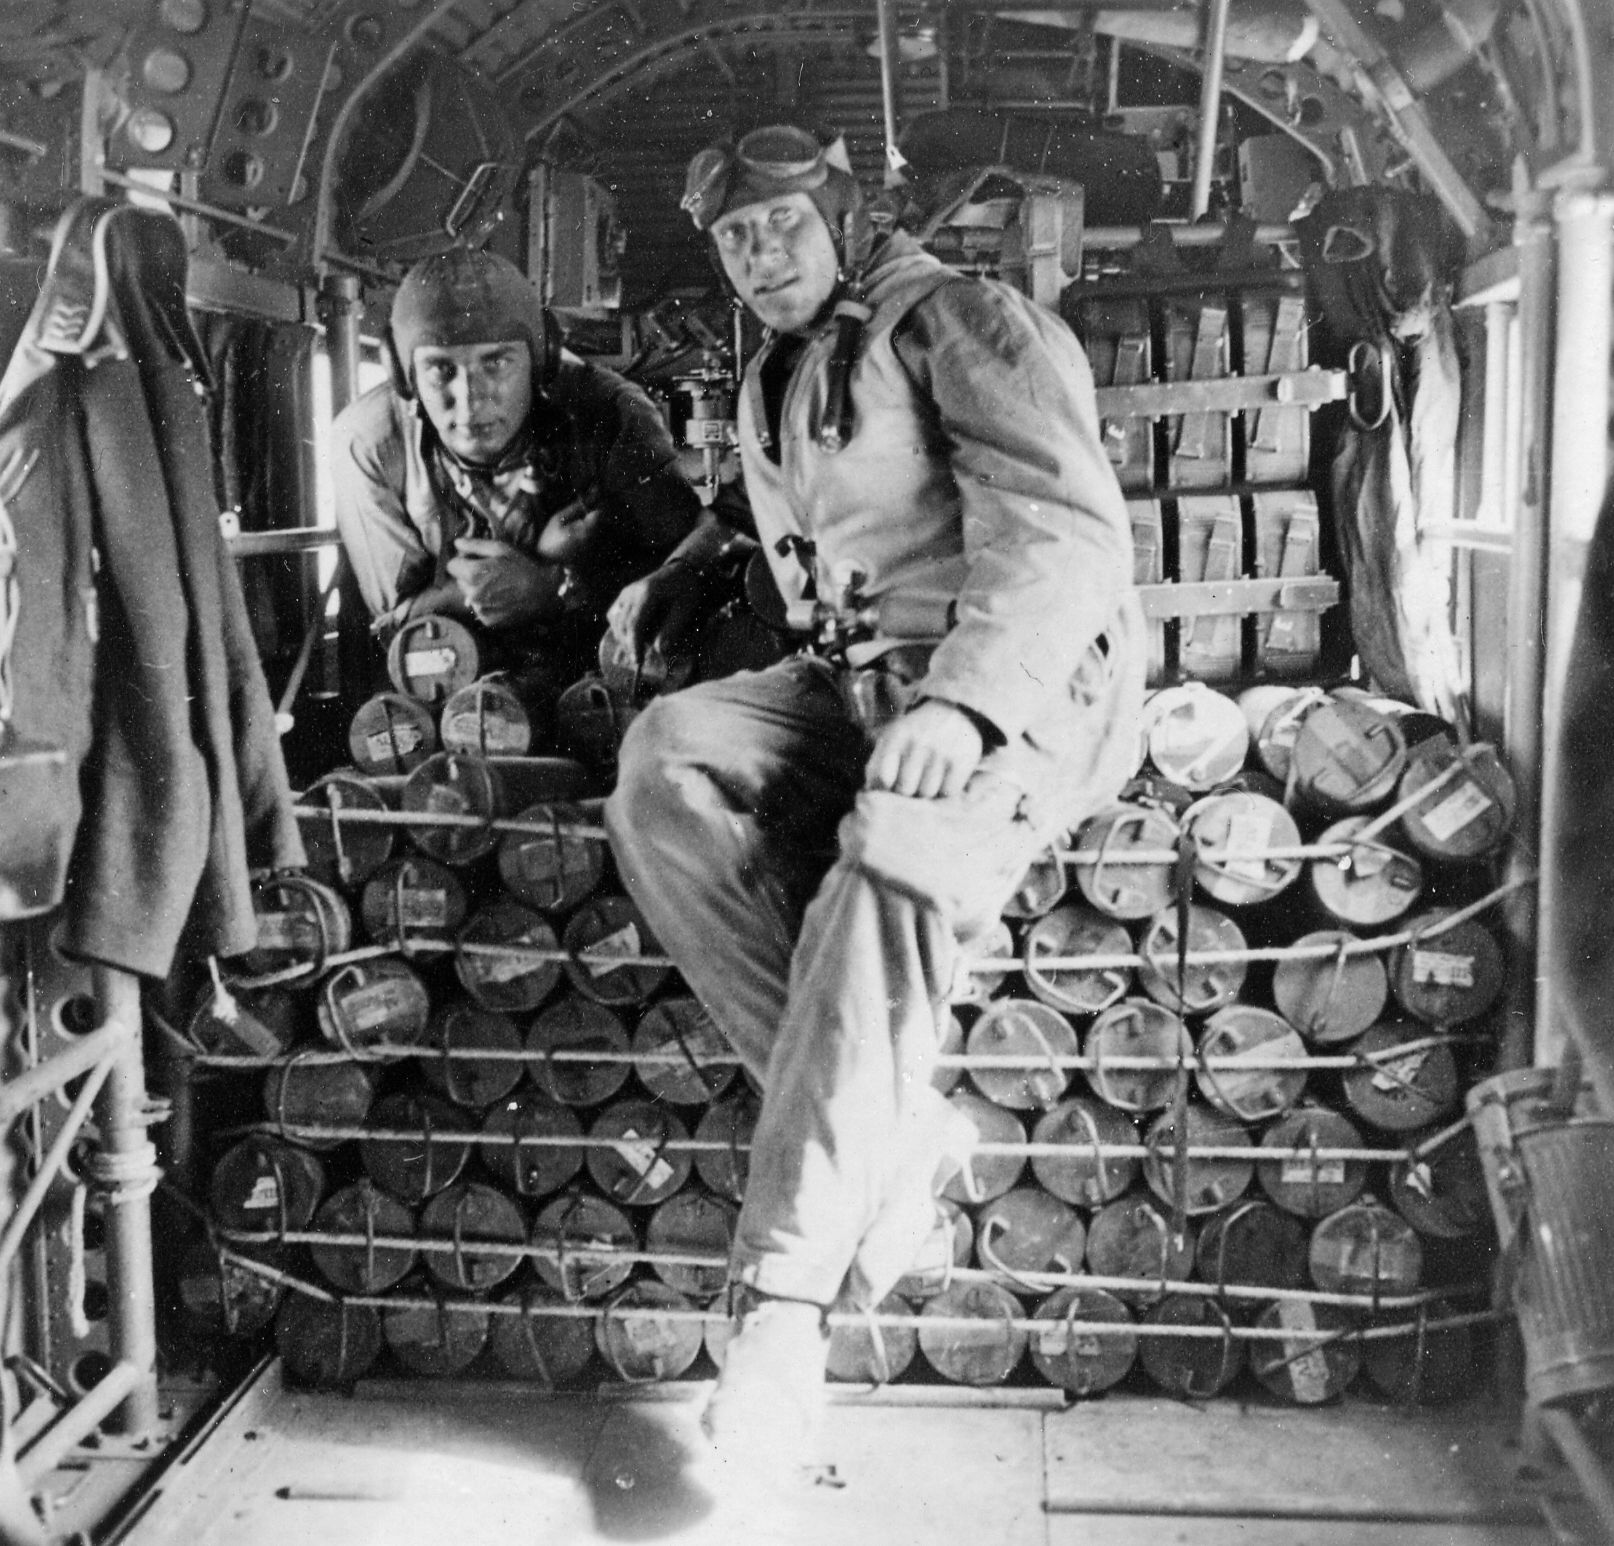 Inside the cabin of a Junkers Ju-52 transport plane being loaded with bombs.  